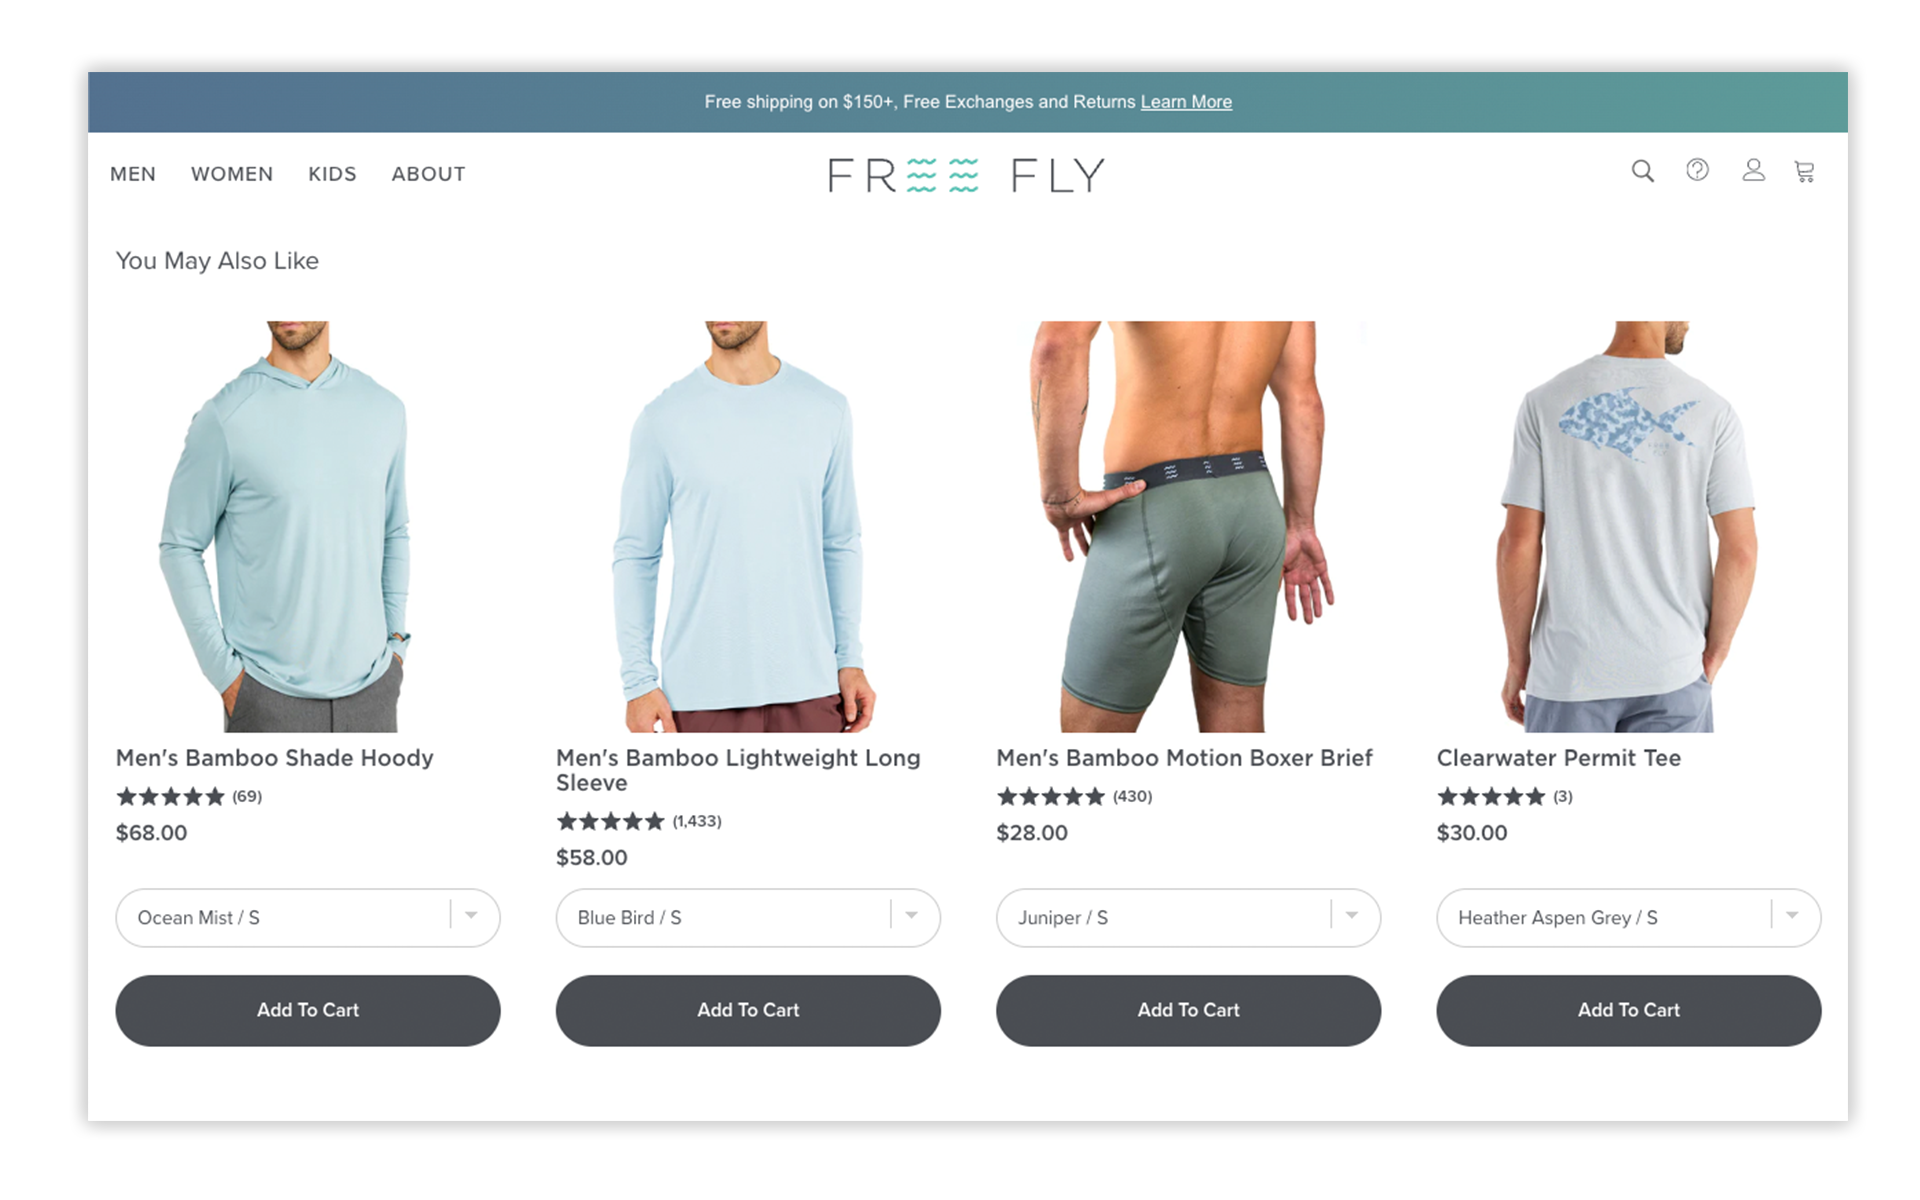 Cross-sell carousel showing product recommendations, by Freefly